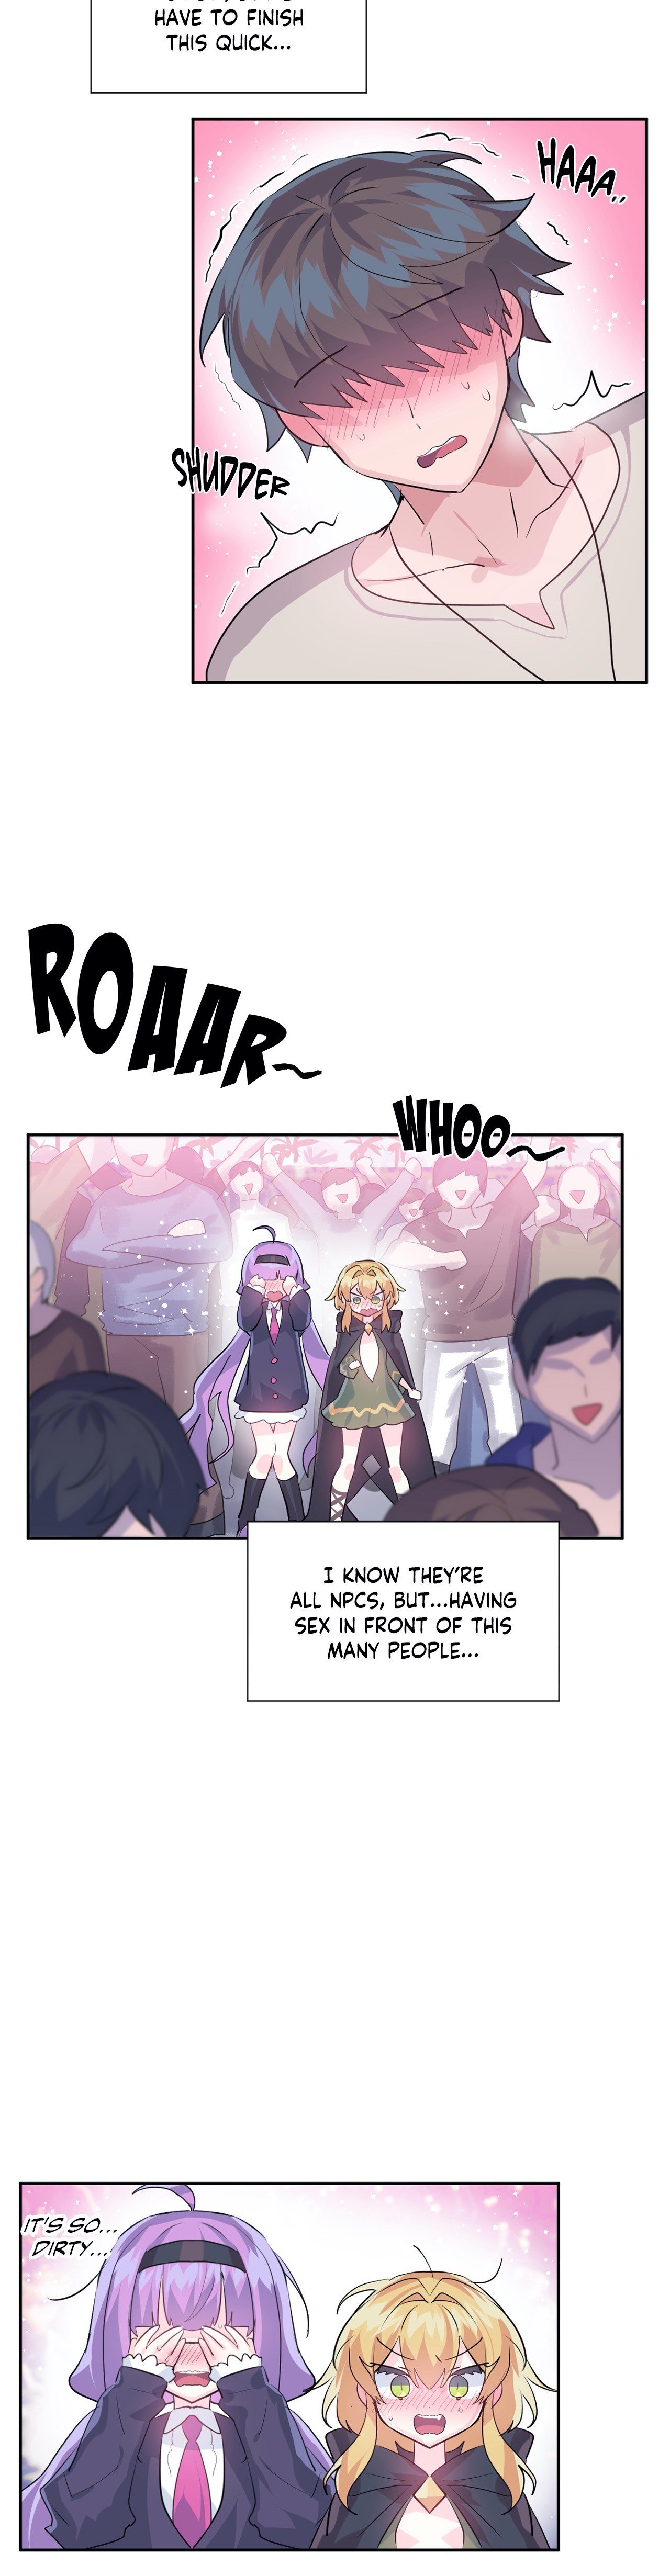 log-in-to-lust-a-land-chap-31-7